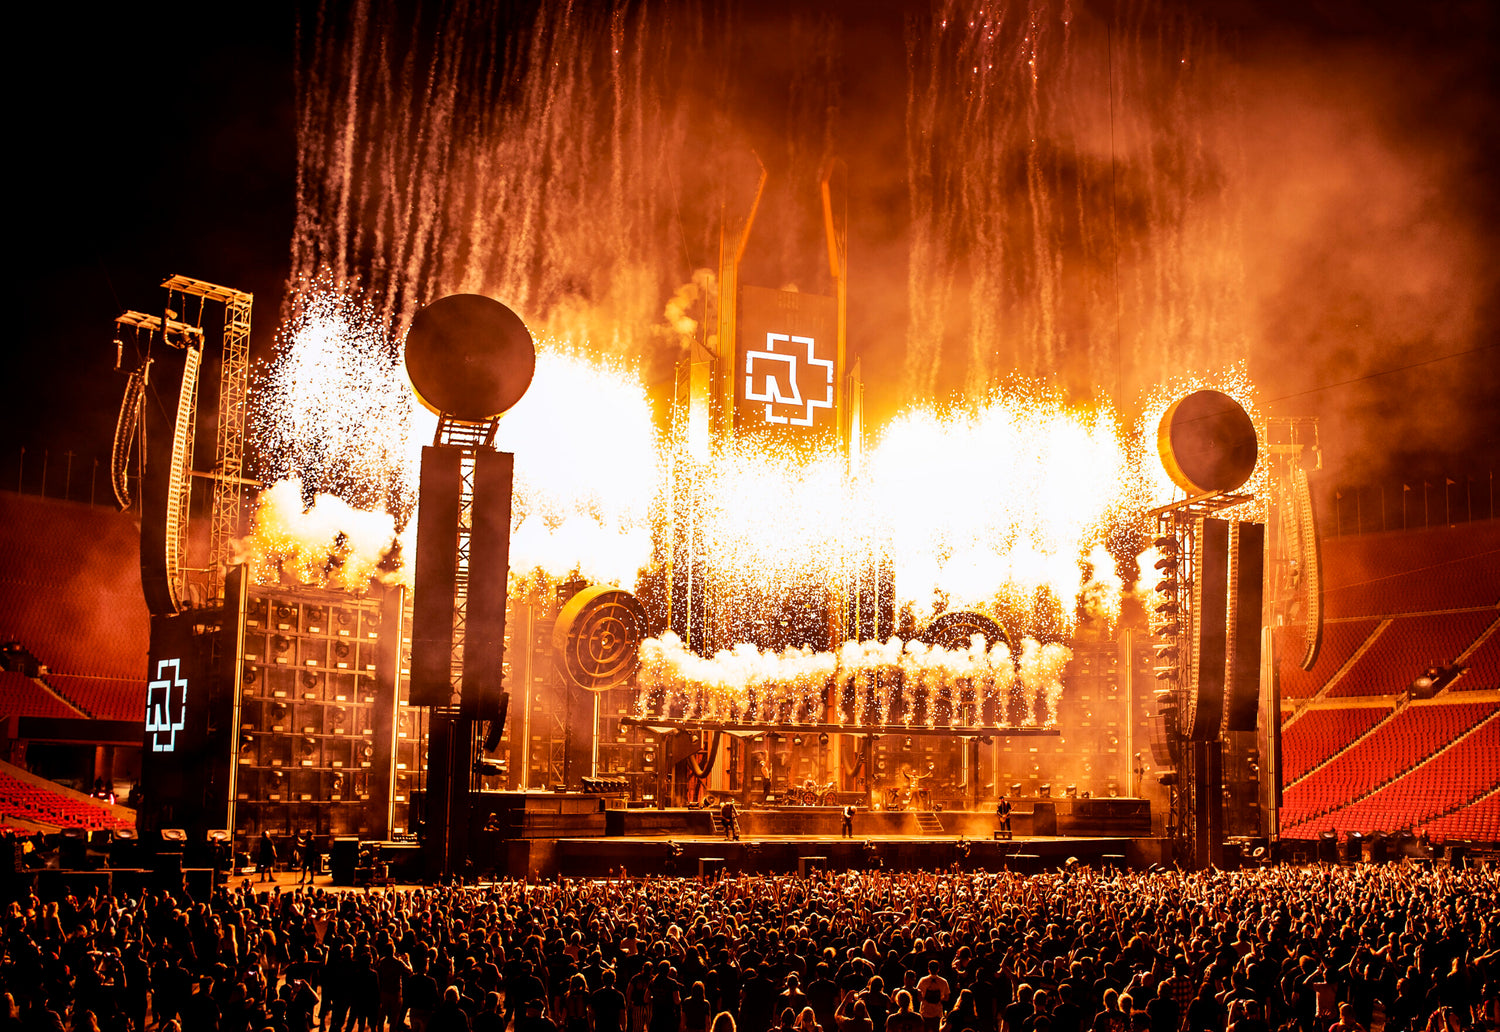 Rammstein submit stadium-sized spectacle with historic Coliseum performance